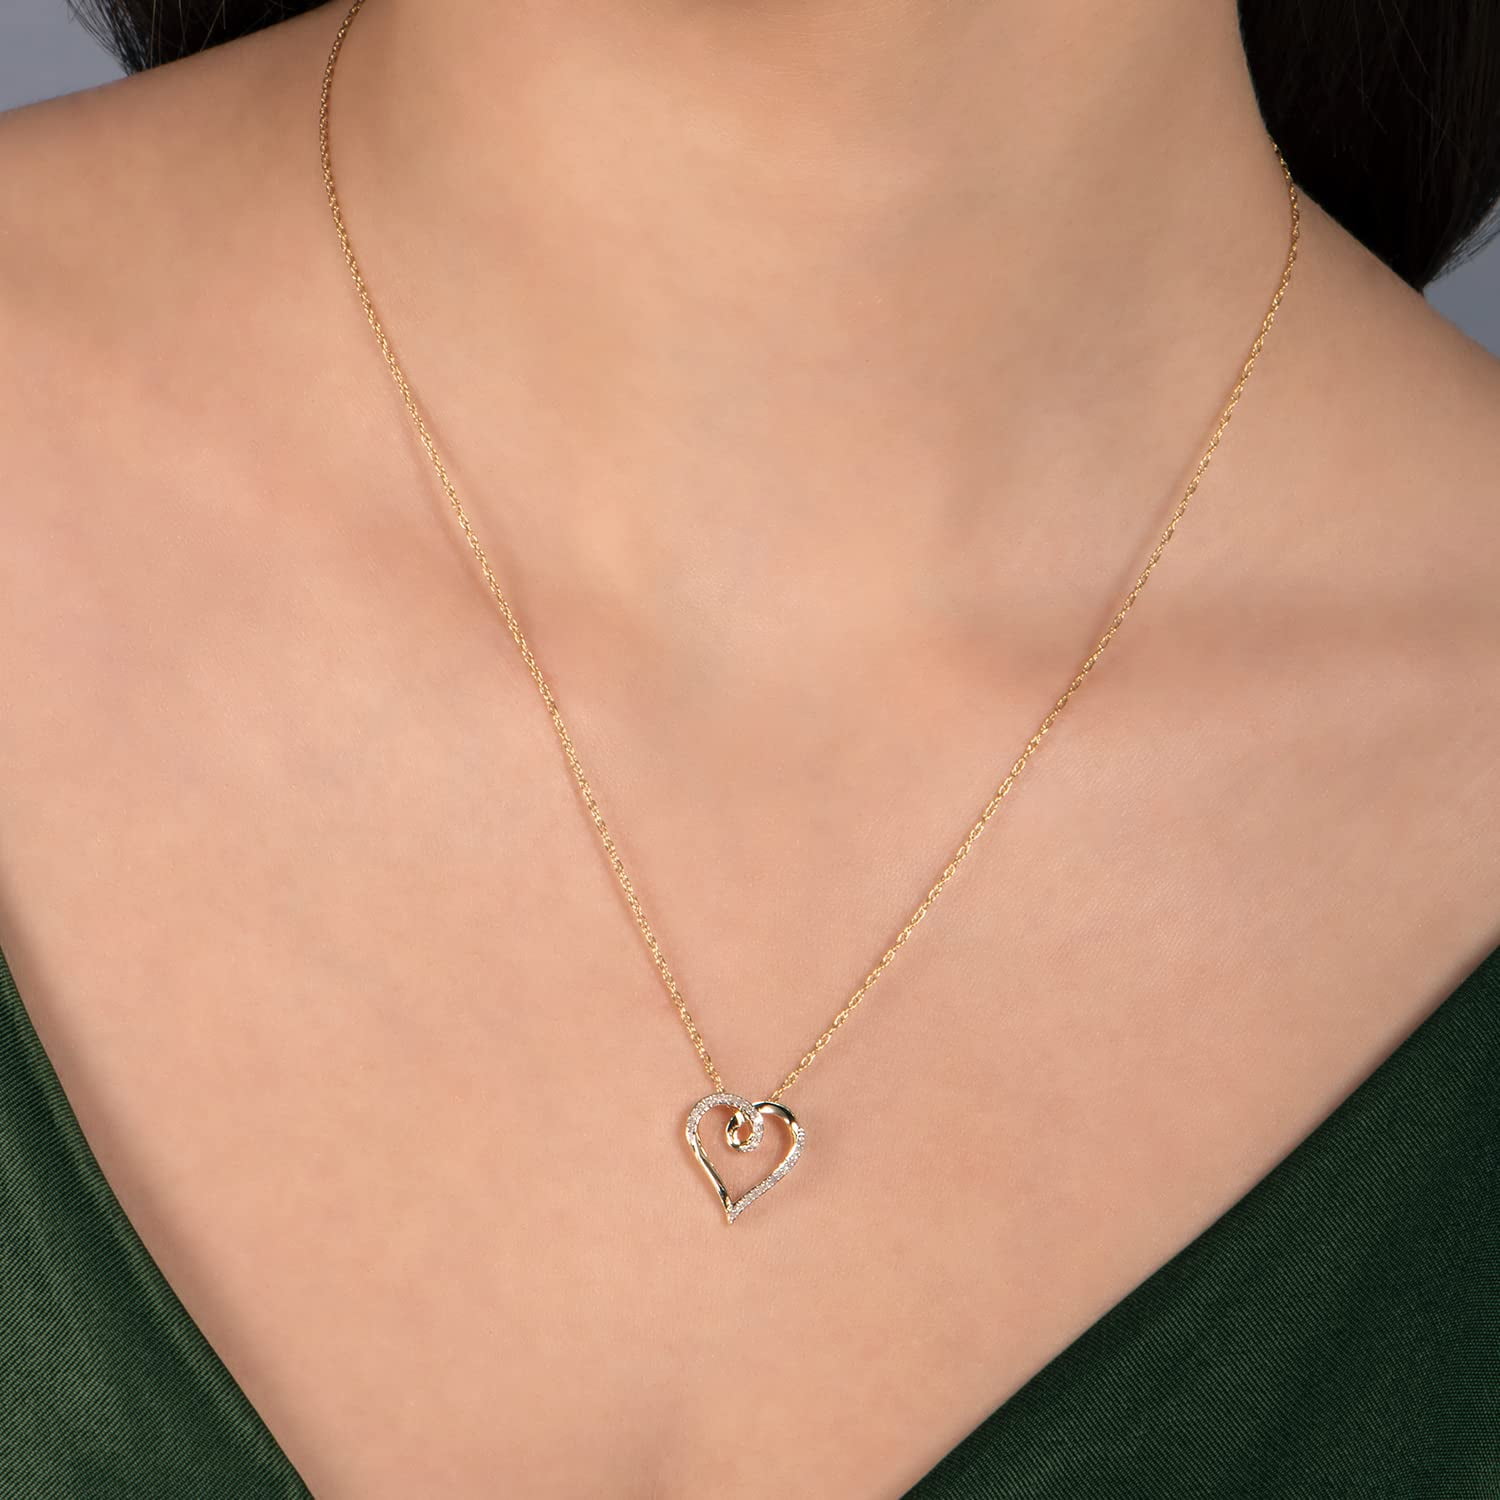 Jewelili 10K Yellow Gold with 1/10 Cttw Natural White Round Diamond Heart  Pendant Necklace, 18